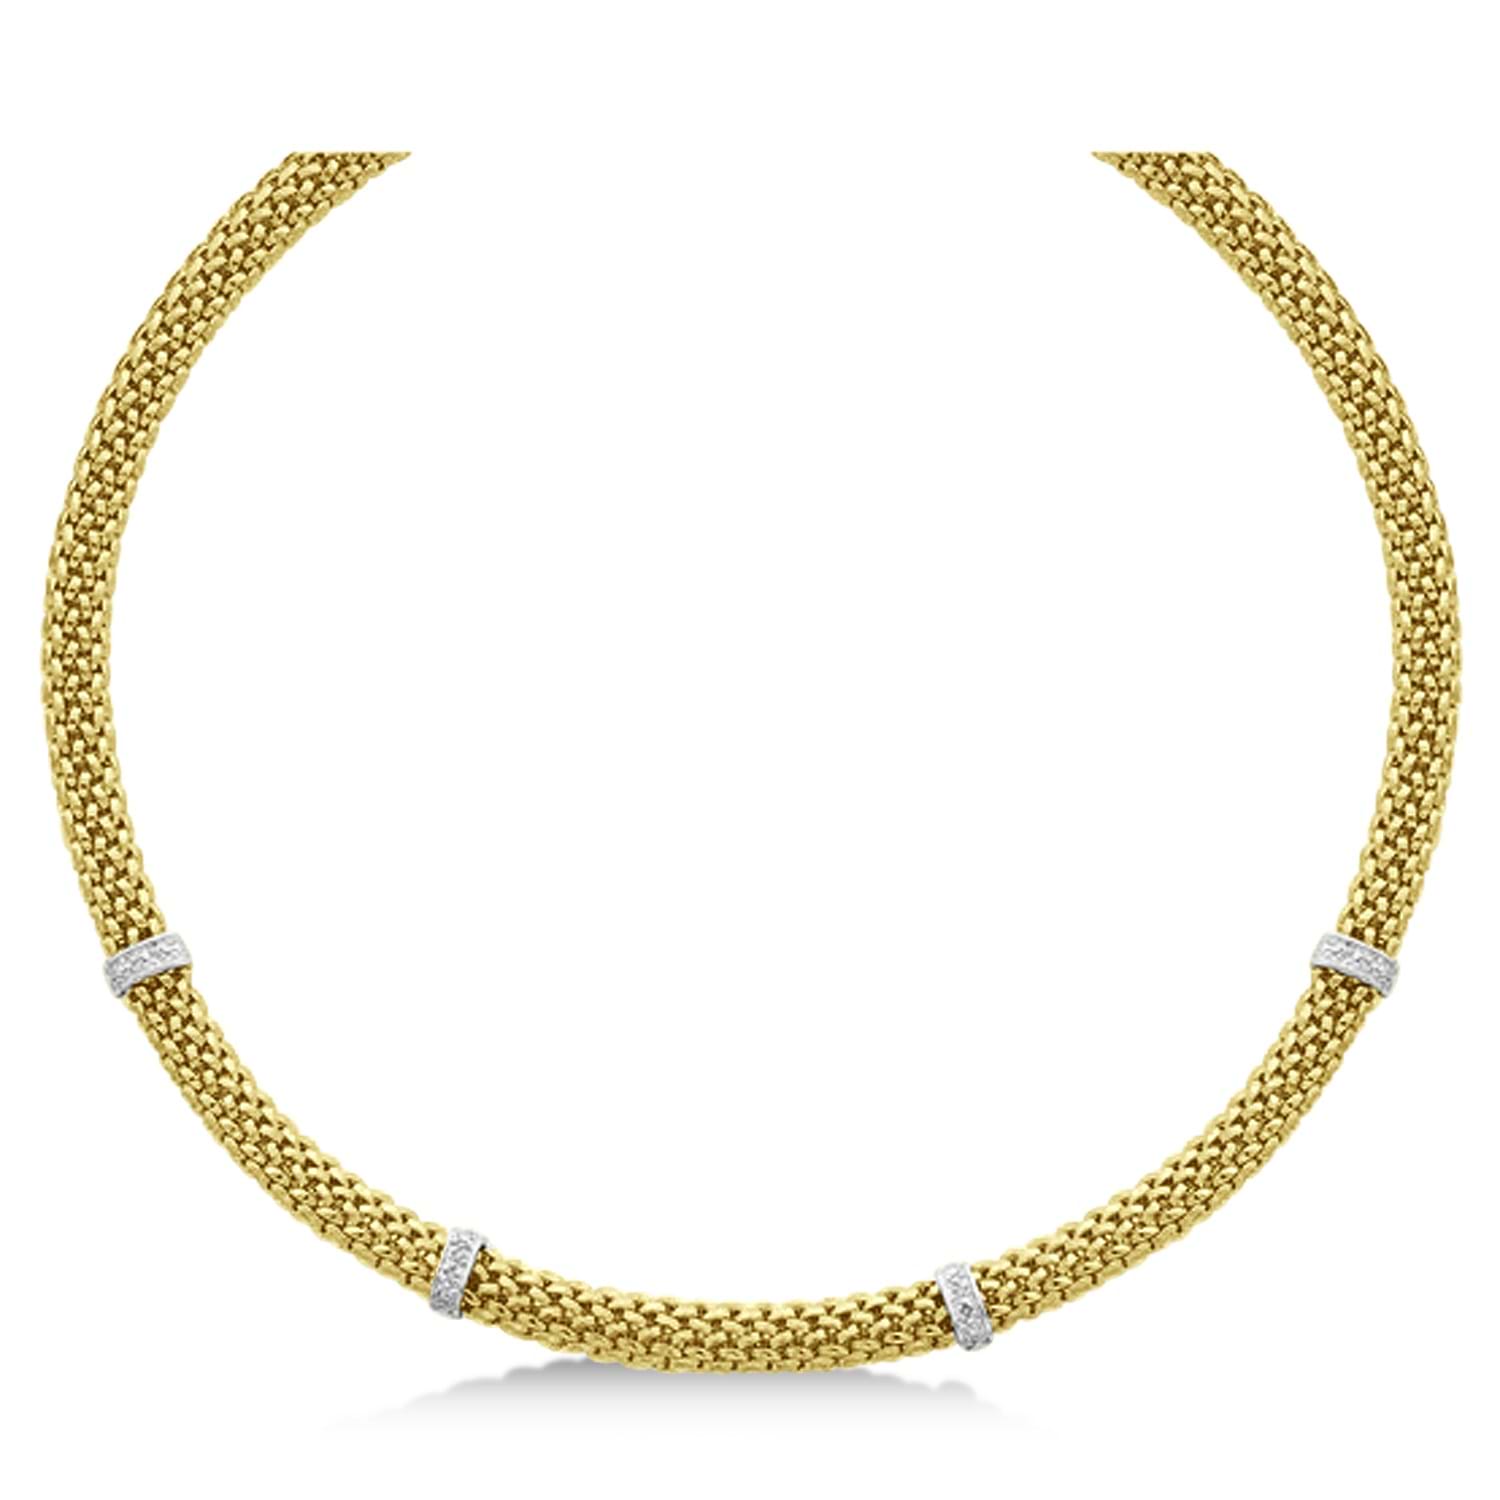 Diamond Accented Mesh Necklace 14k Two Tone Gold (0.05ct)